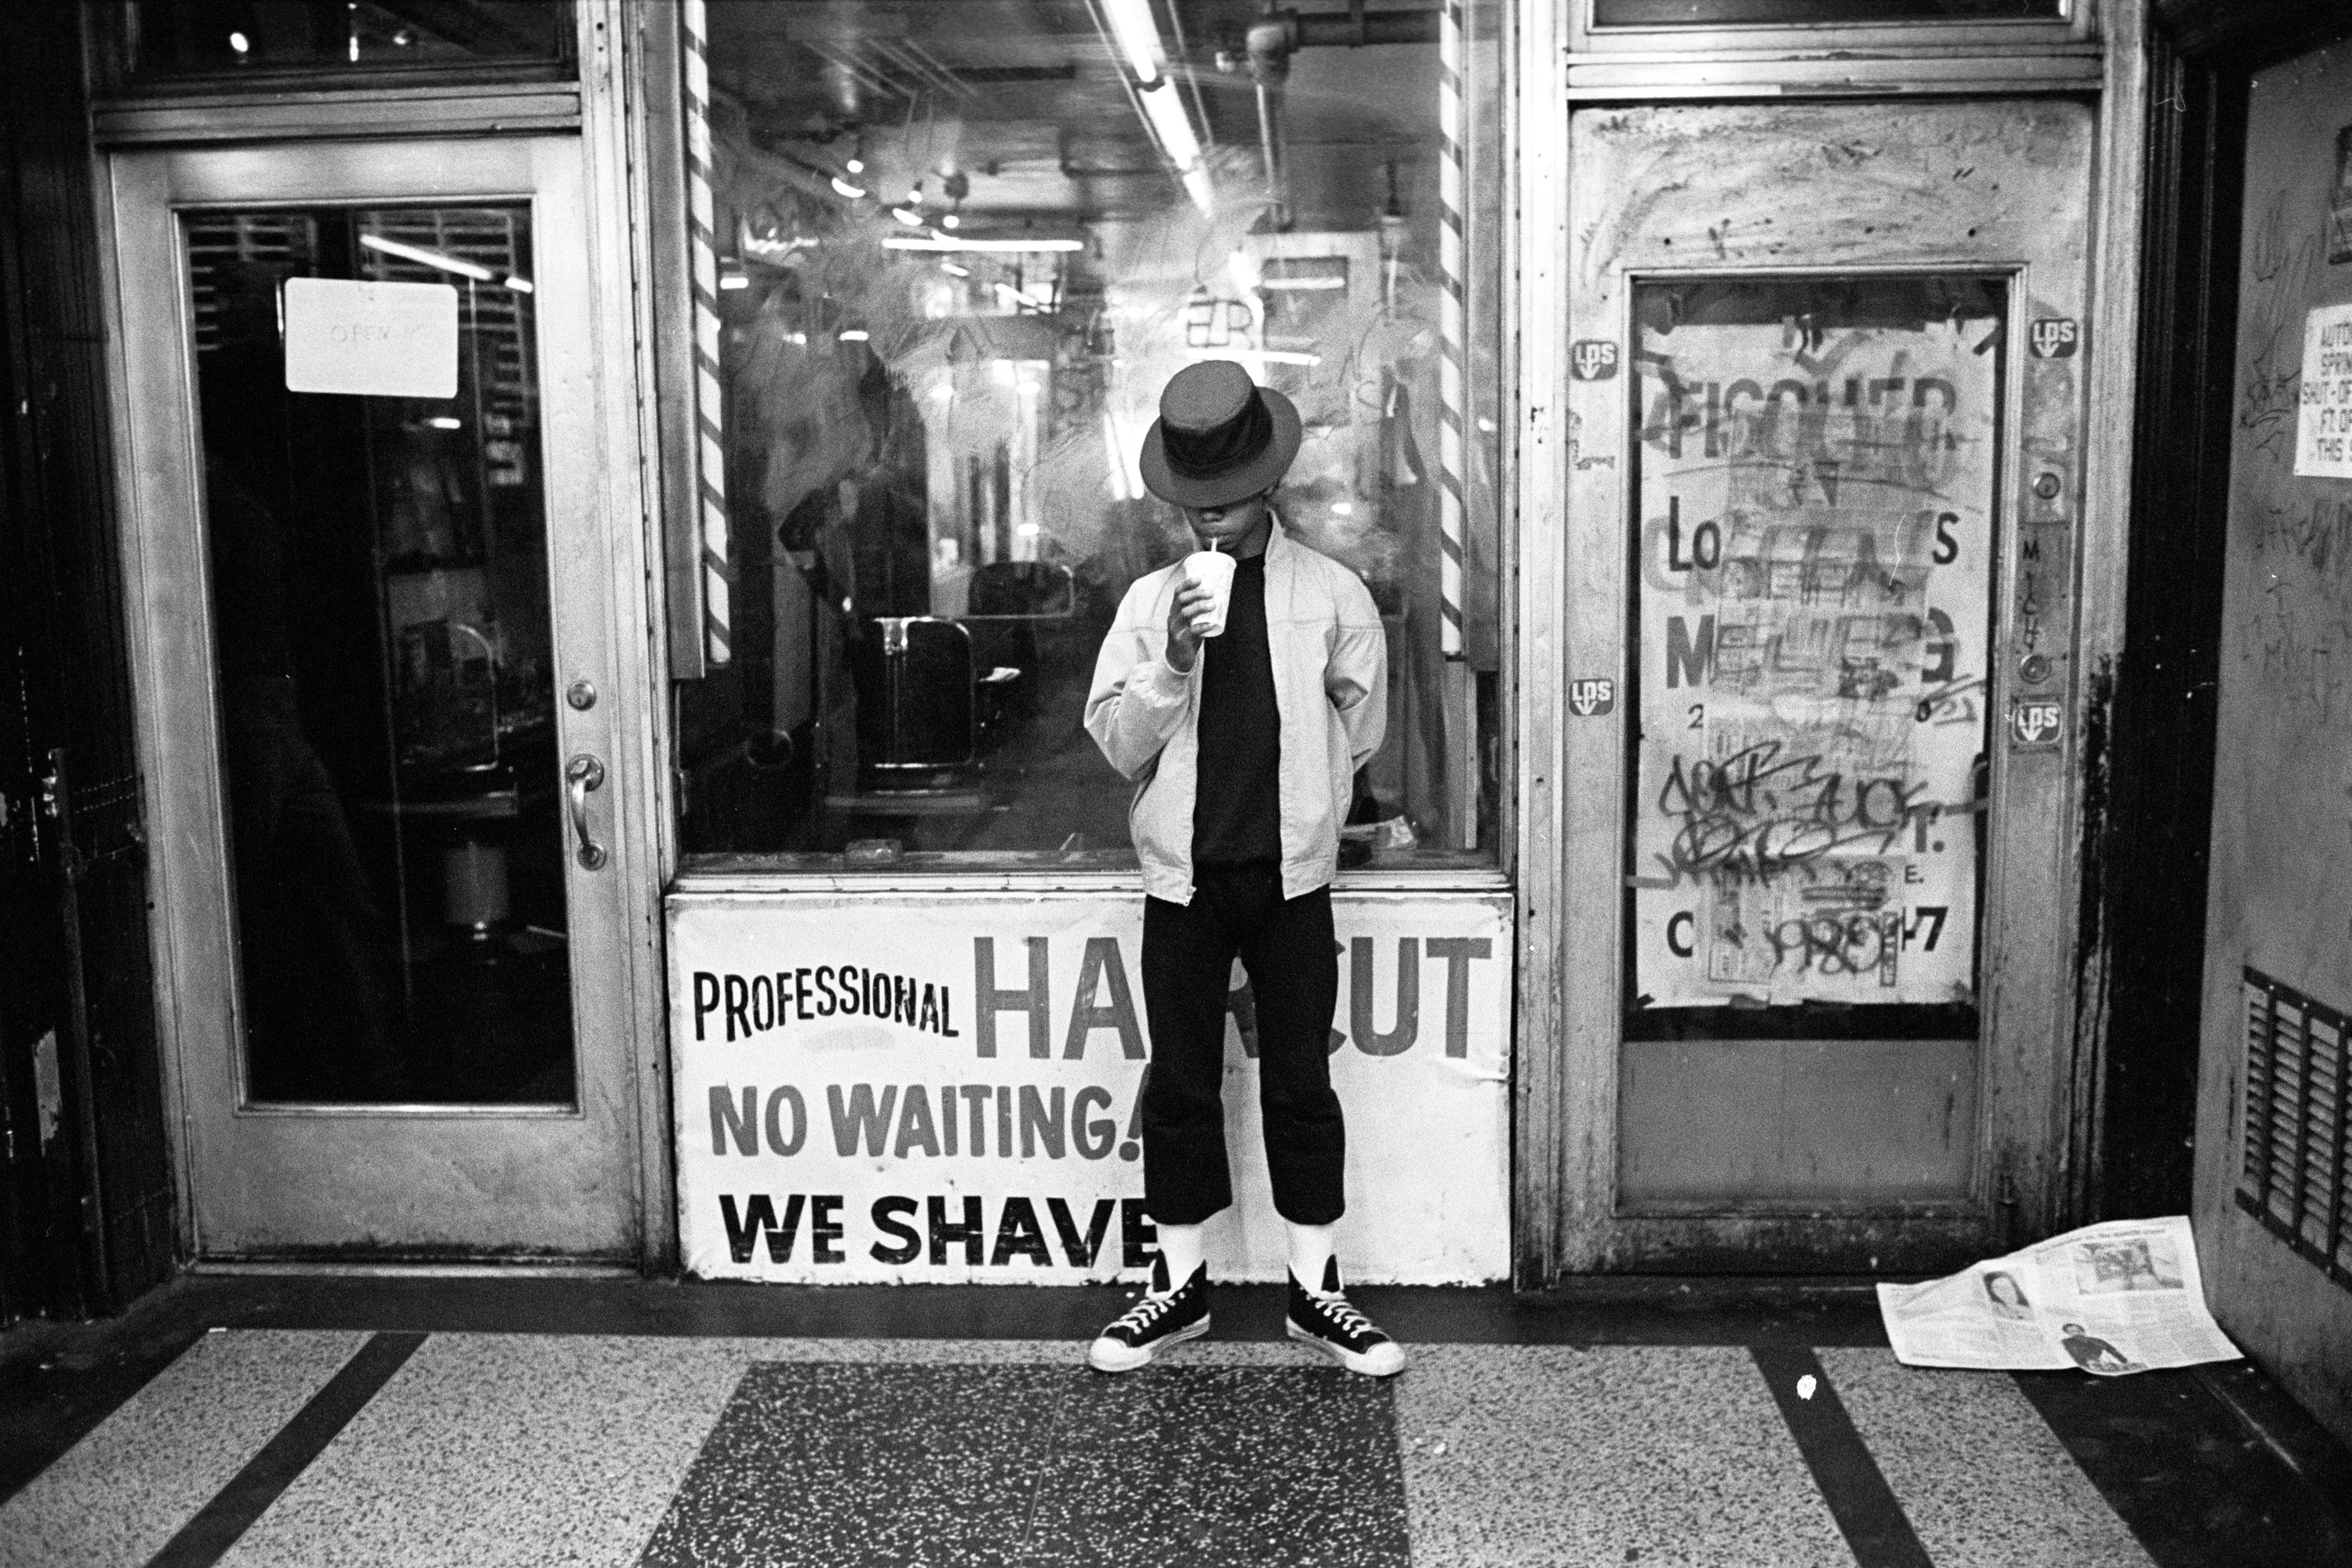 1980 - New York, New York, USA: Teenage hustler drinks a soda in the 8th Avenue subway station entrance in Times Square. (Stephen Shames/Polaris)